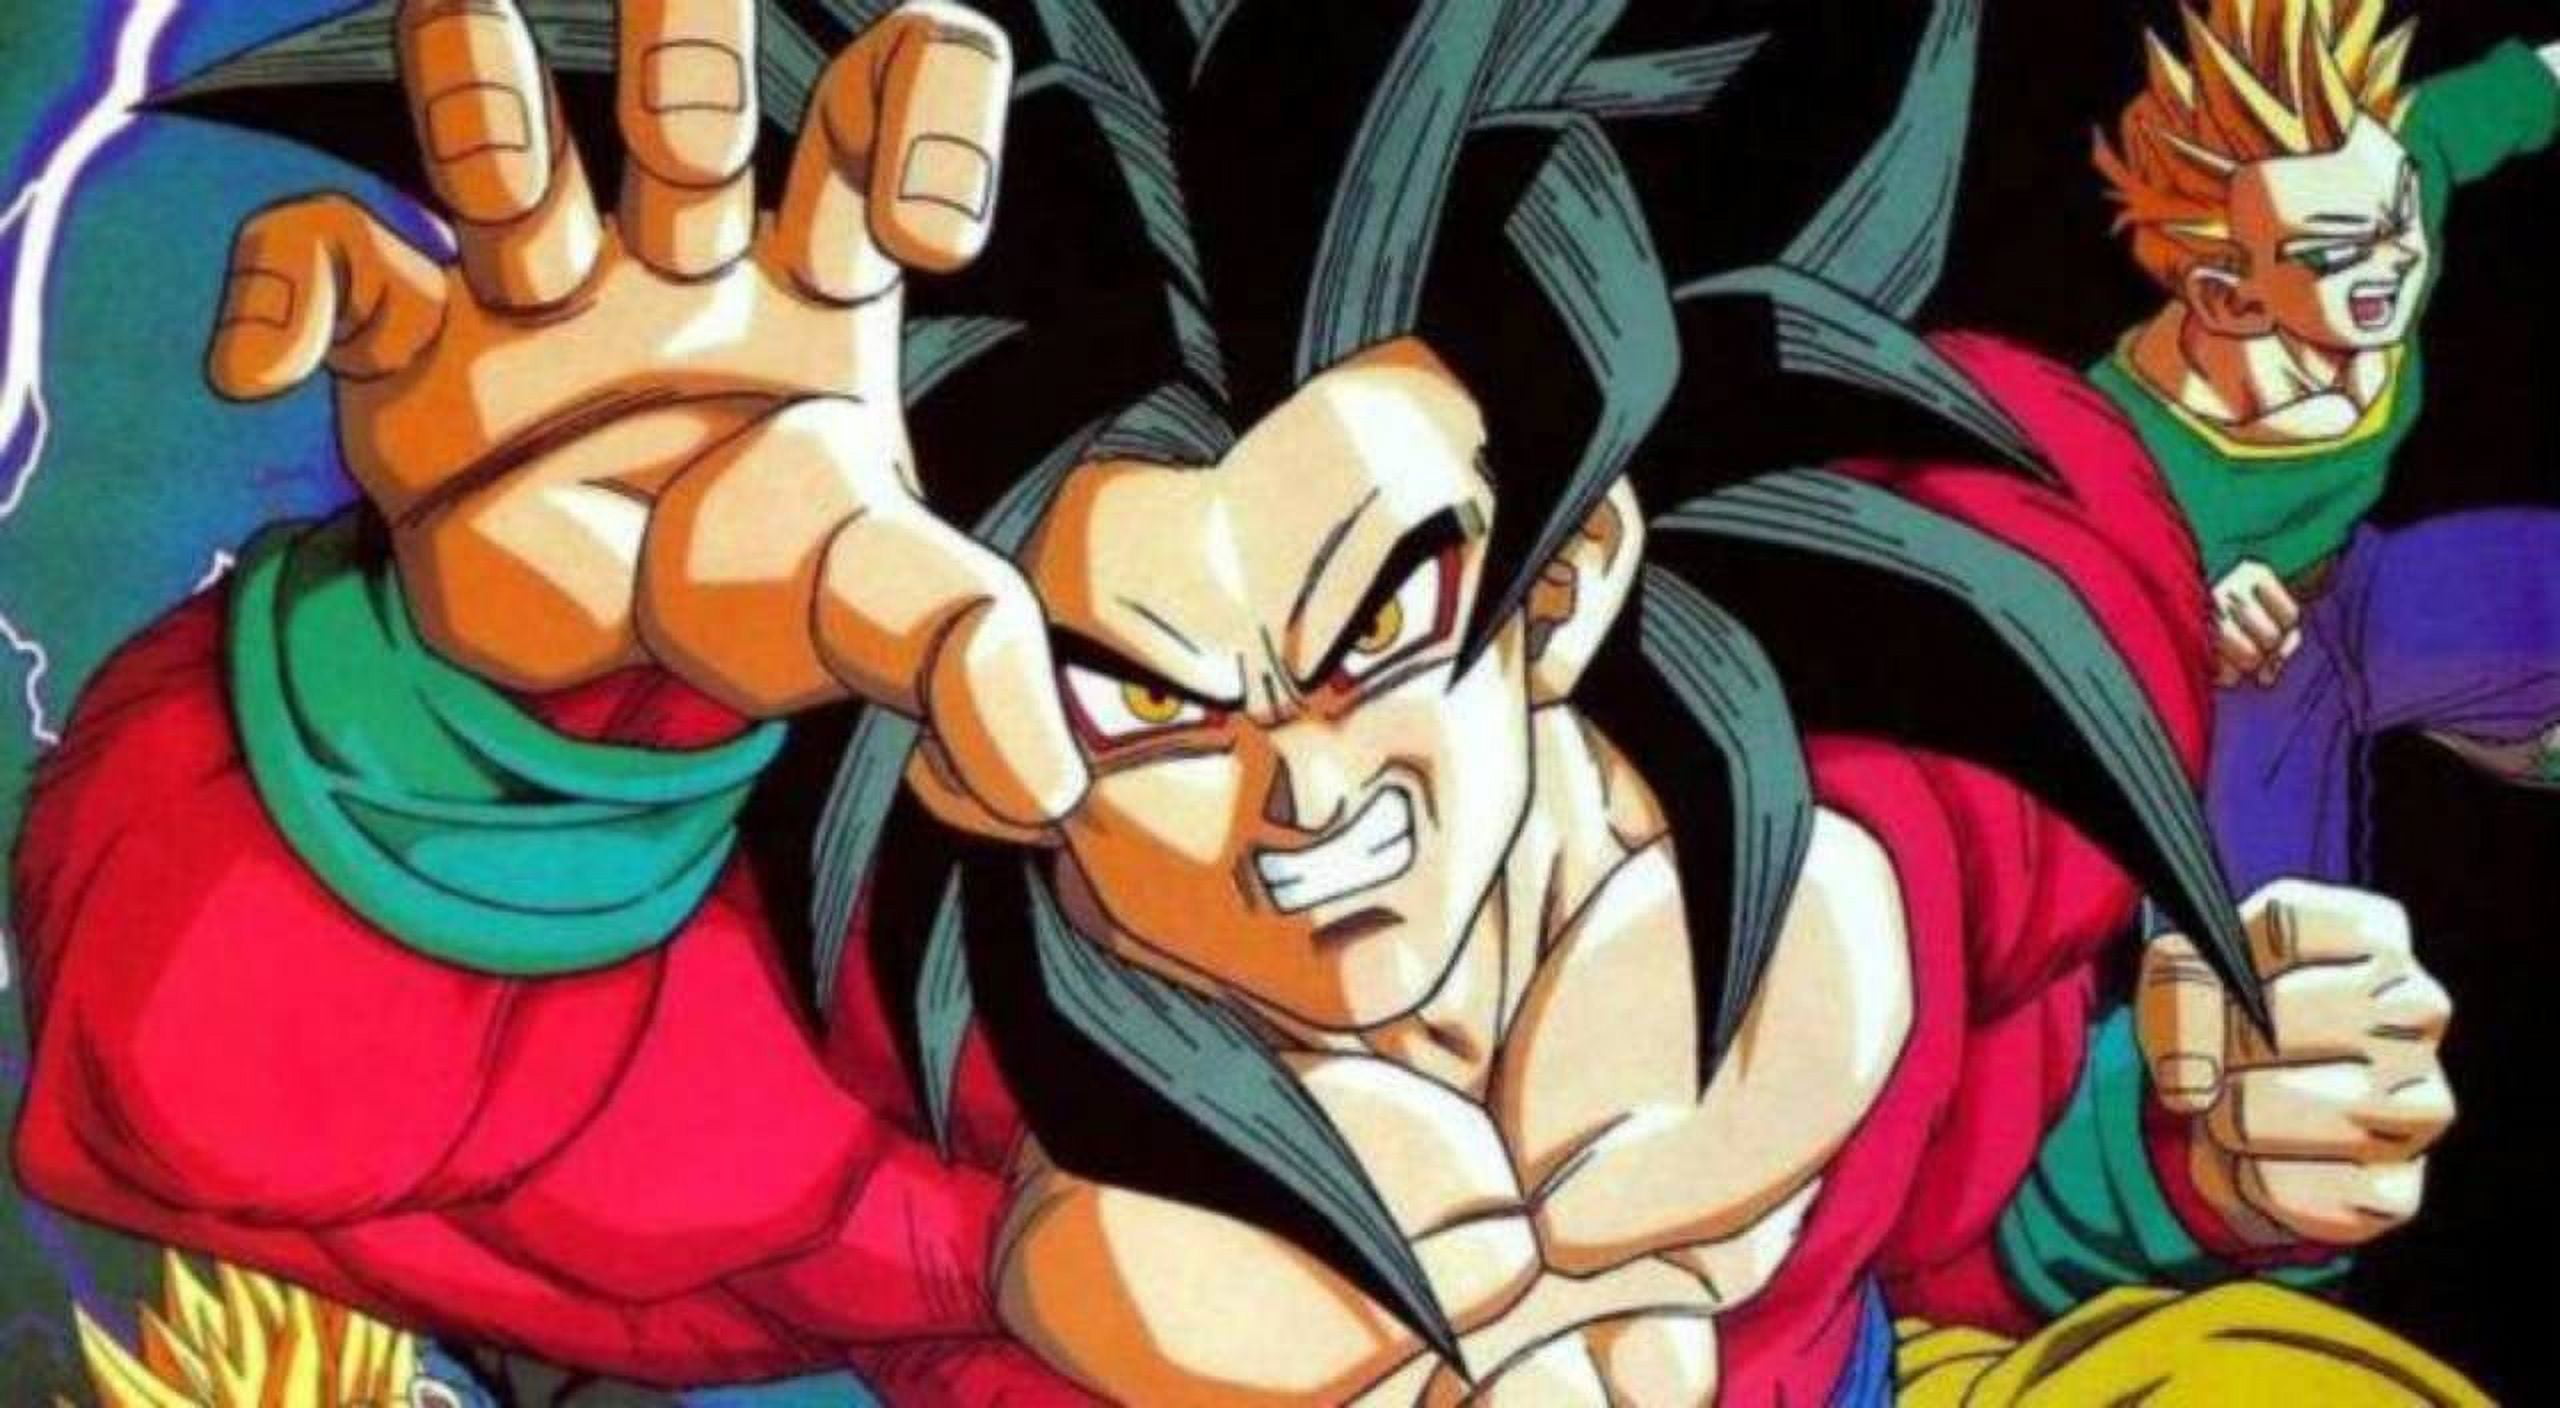 Buy Dragon Ball GT DVD Complete Edition - $29.99 at